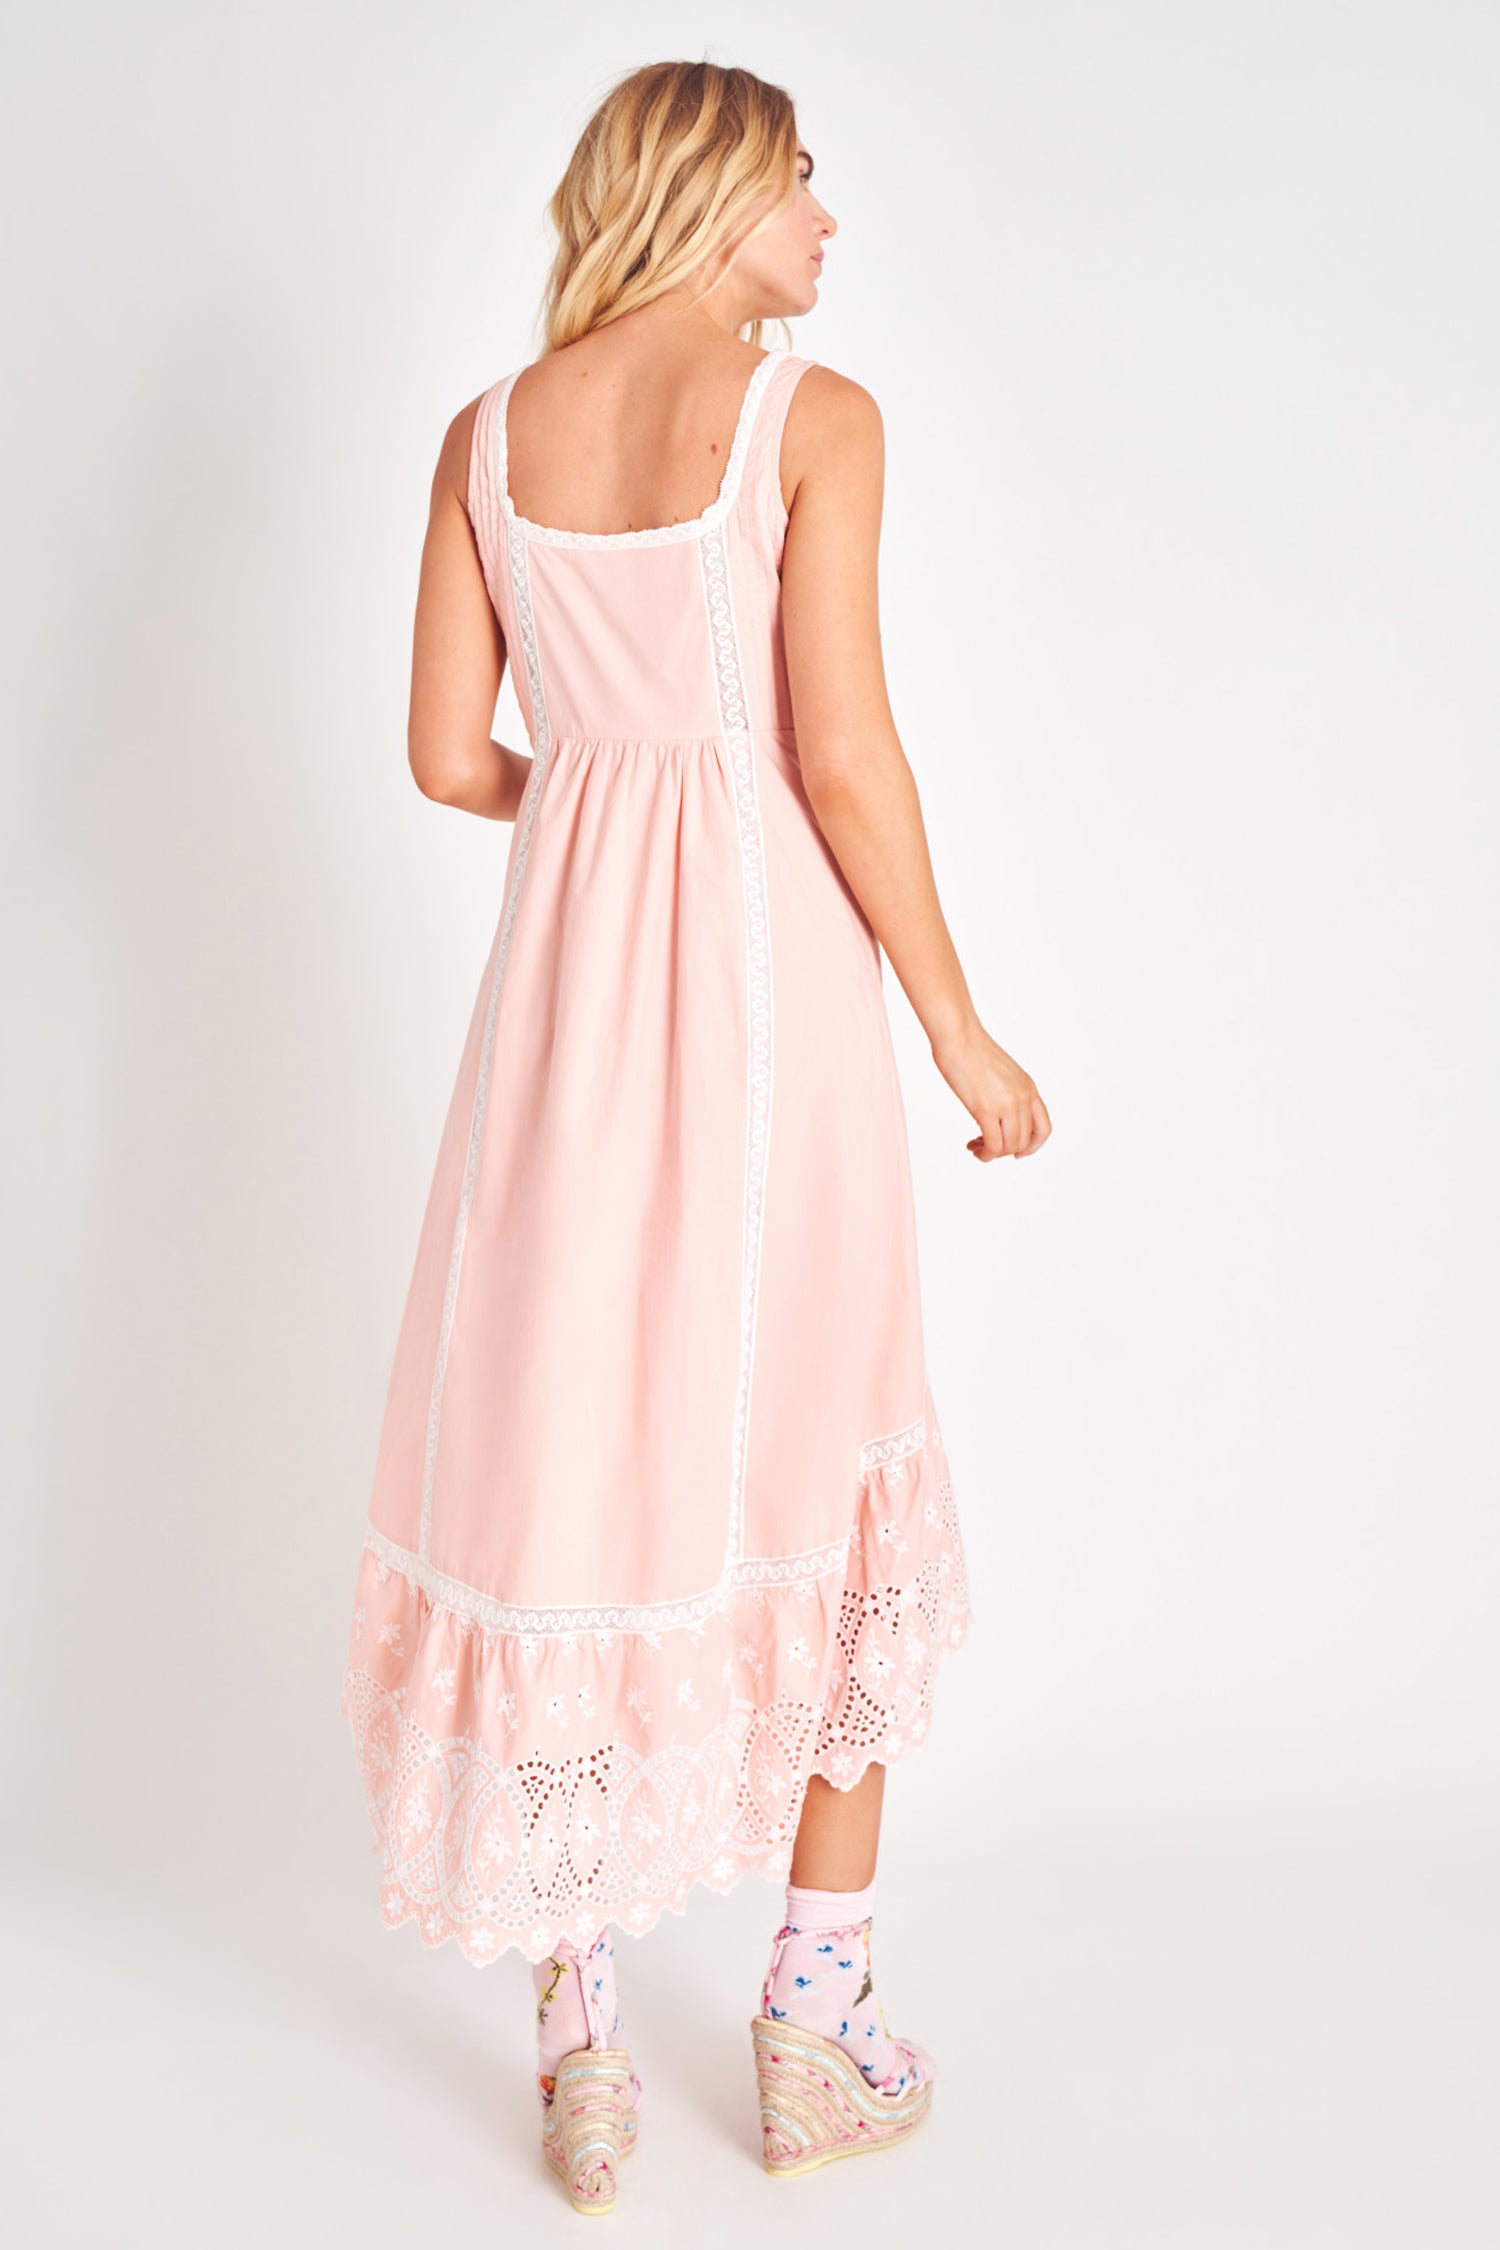 Pink high to low midi with embroidery detail.